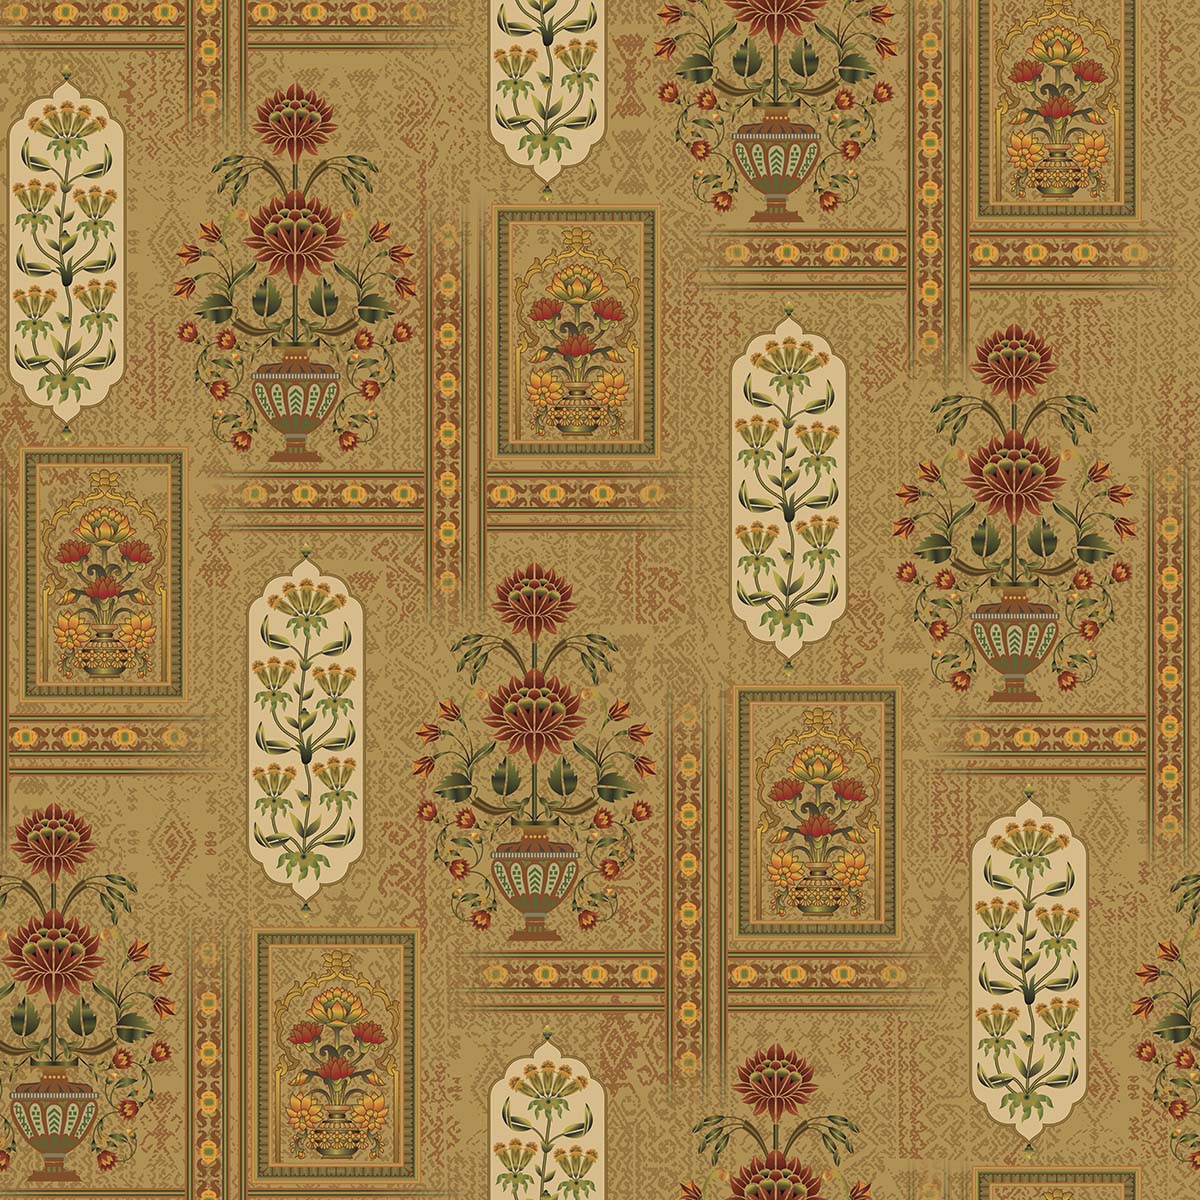 A wallpaper with flowers and ornaments